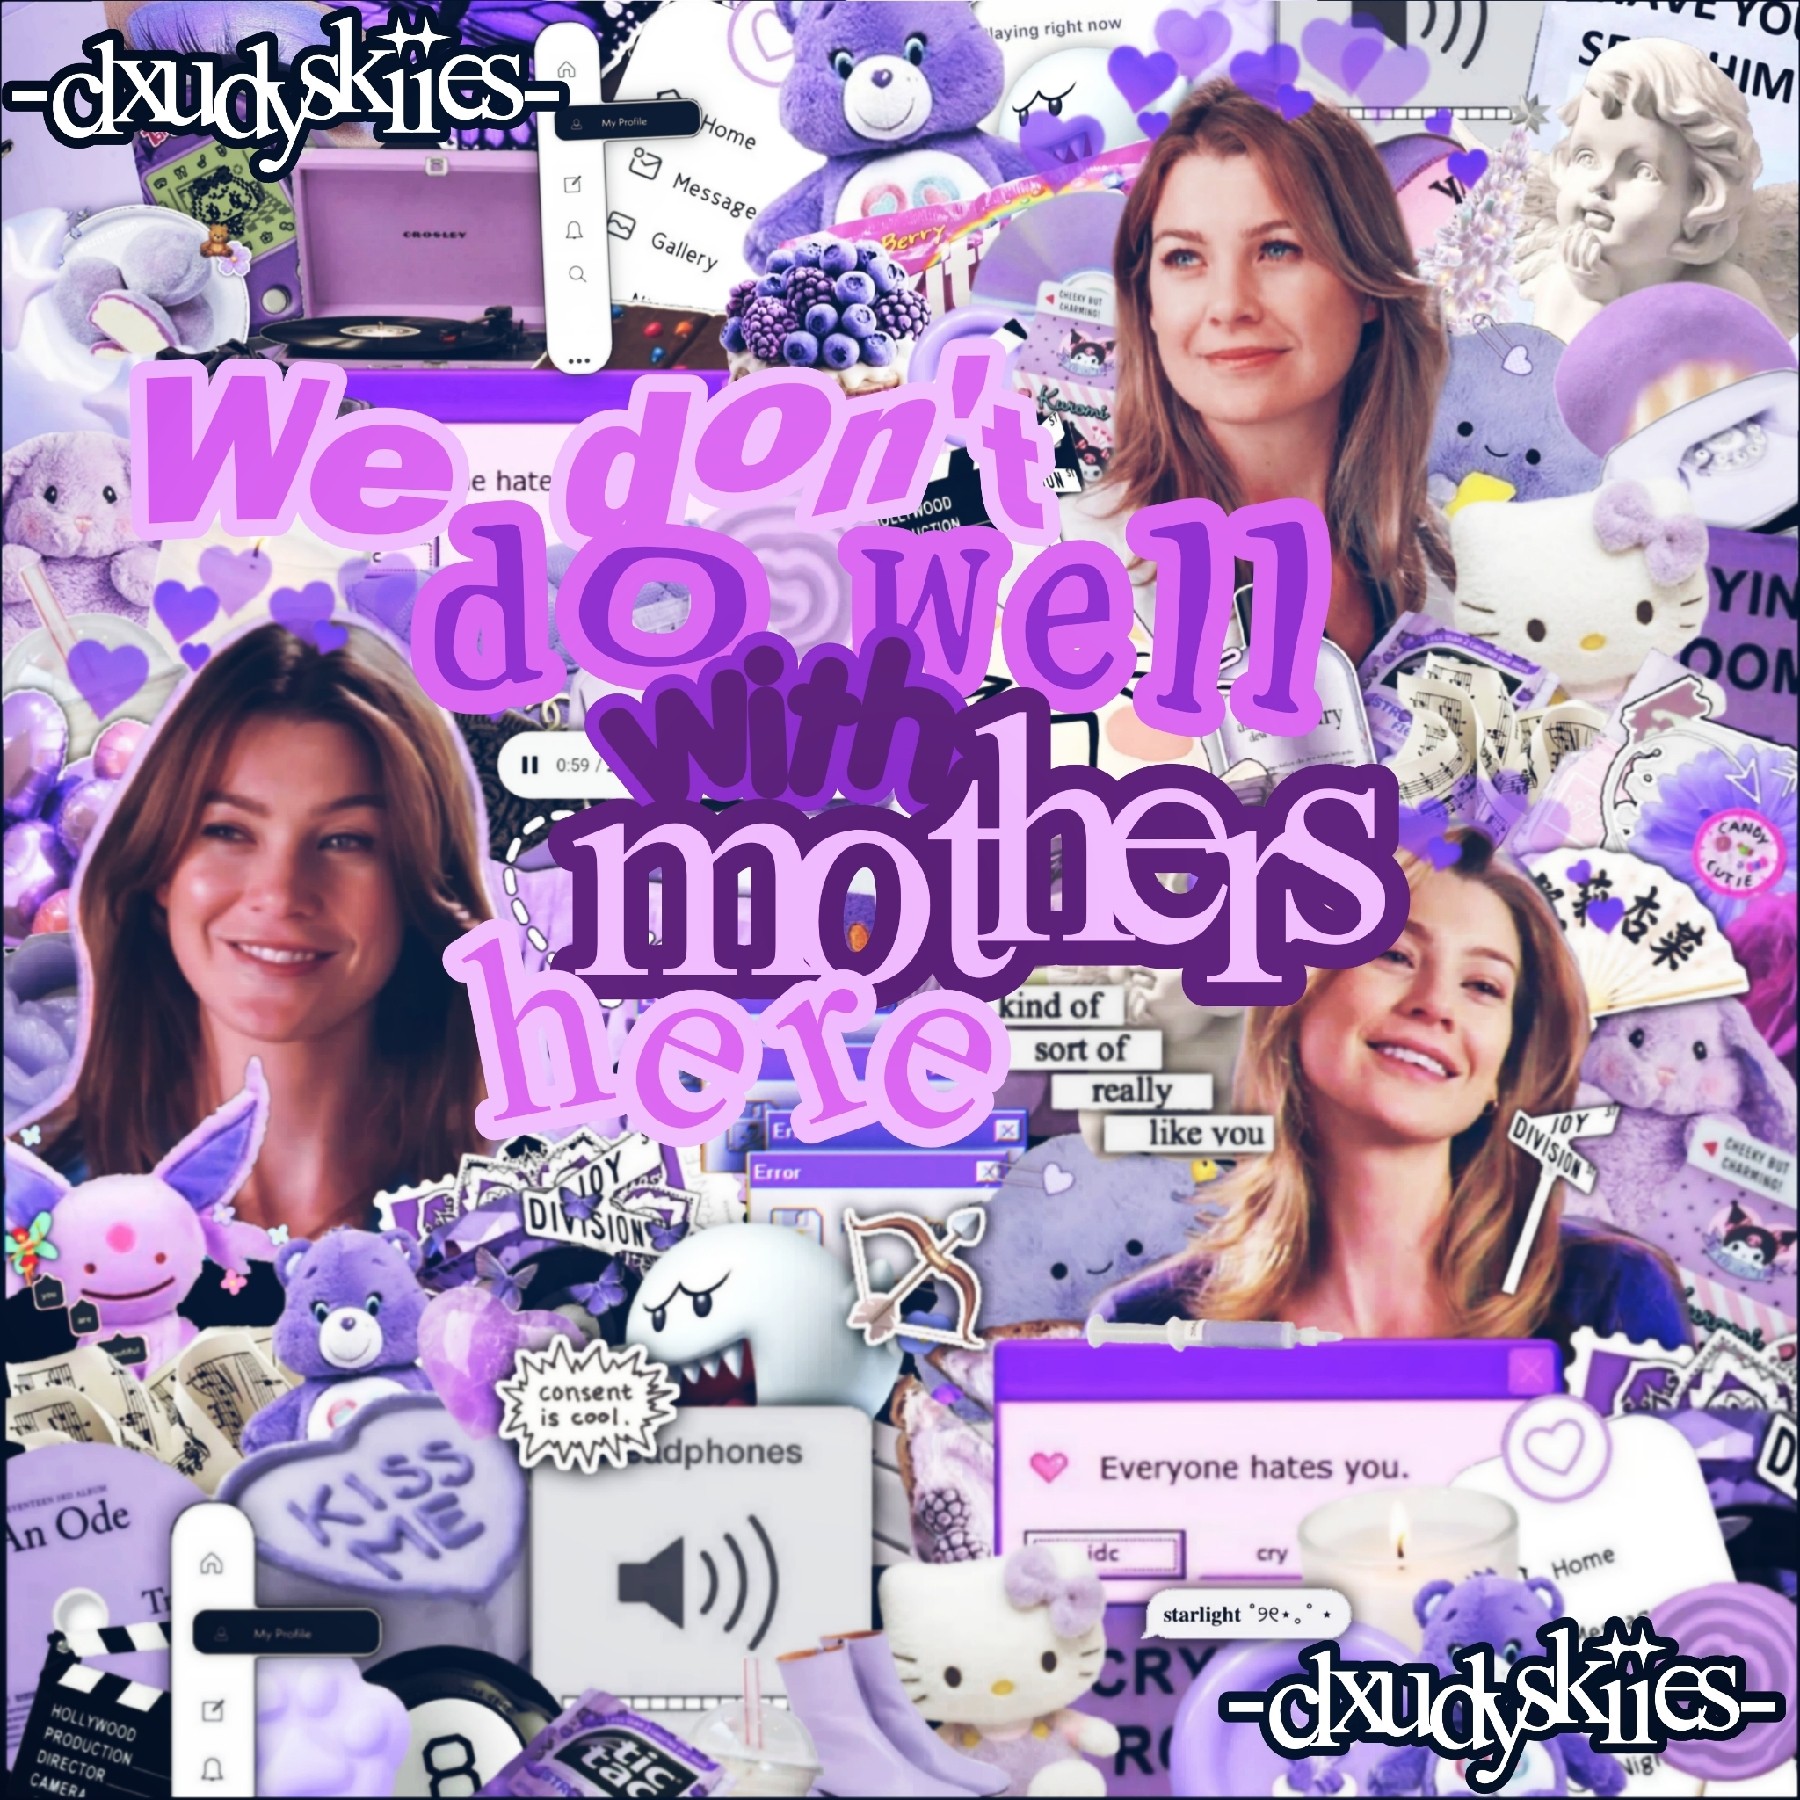 🥼🩺💜 8 • 5 • 2023 💜🩺🥼
bc Meredith is the most slay character ever <3333
I might end up so ng every character on accident 😶😂